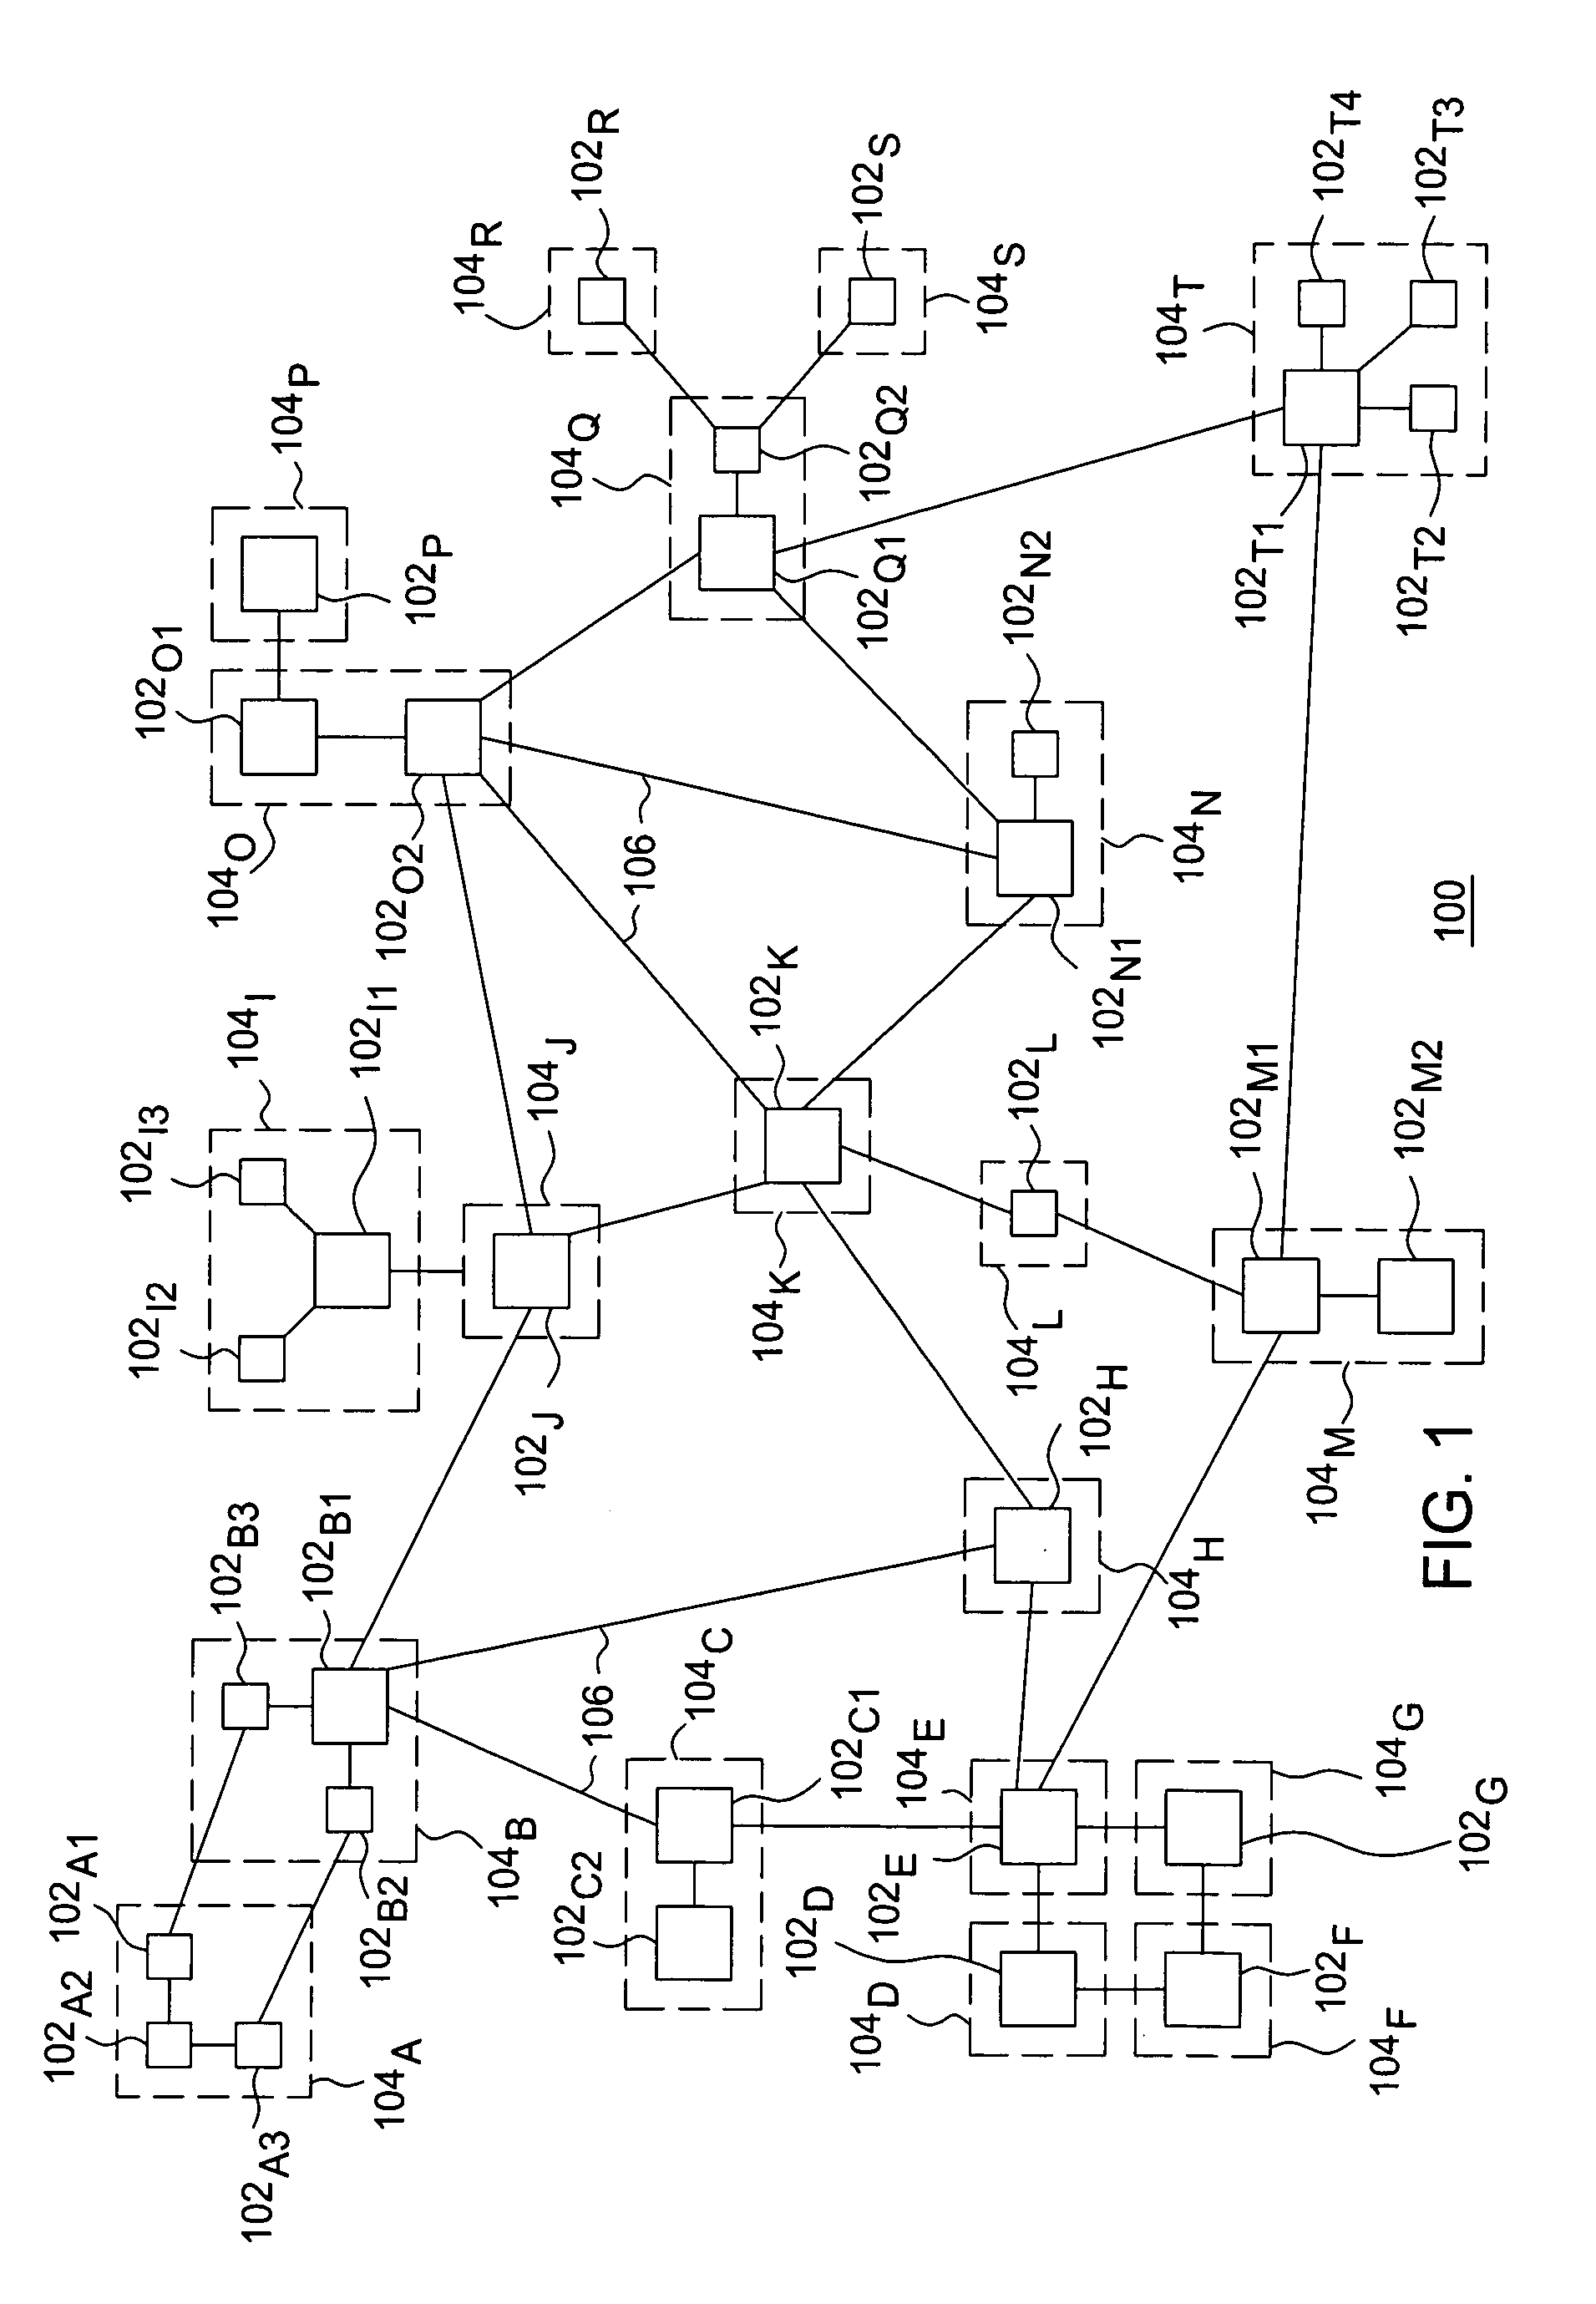 Method and apparatus for quantifying an impact of a disaster on a network